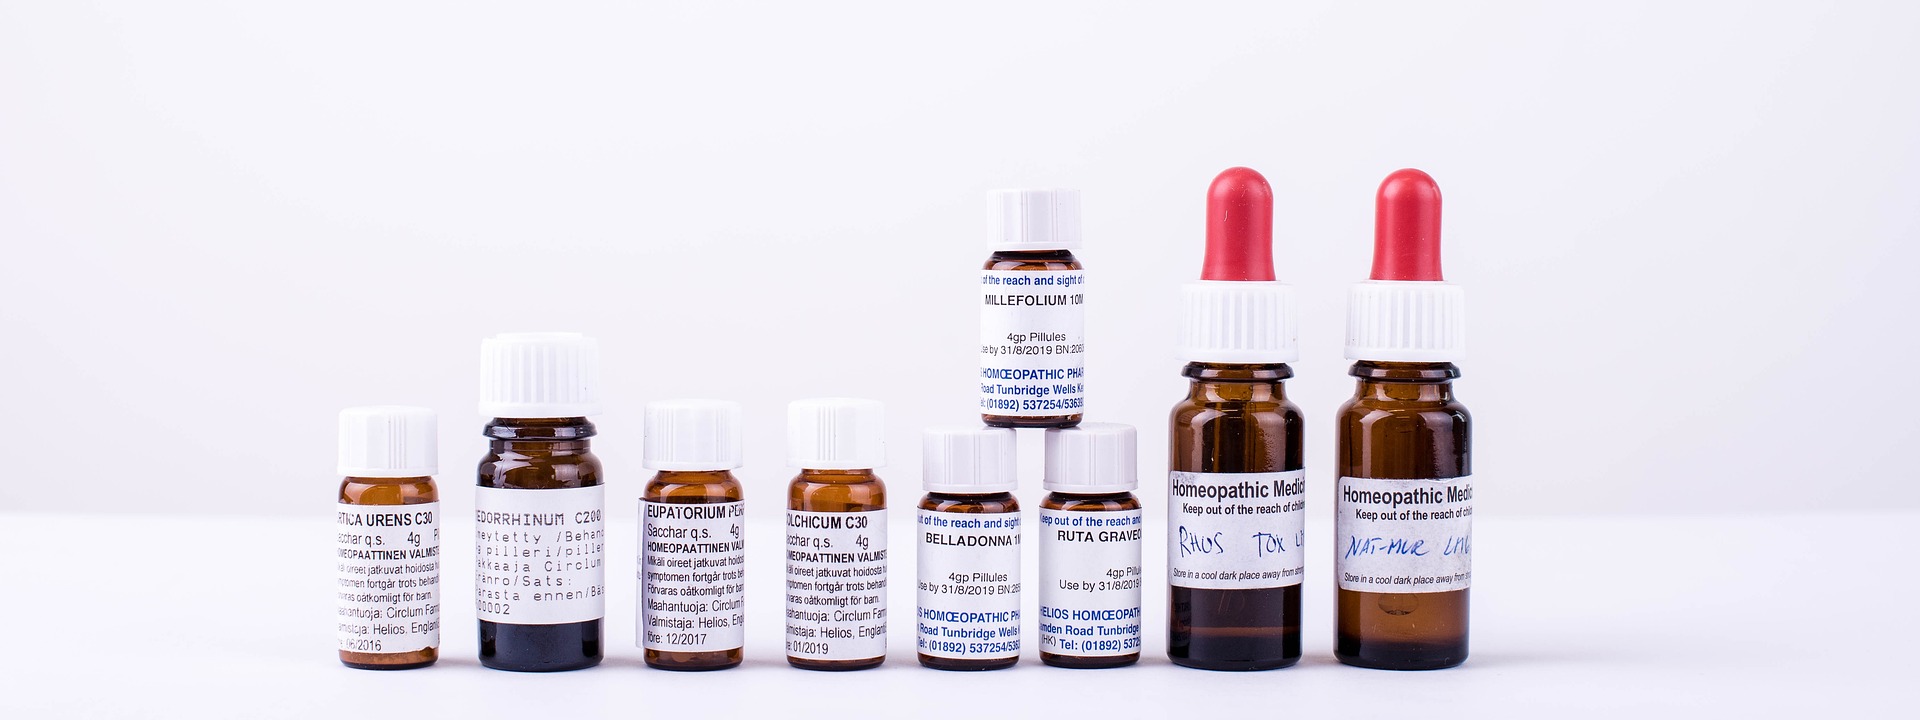 Homeopathy Treatment - How It Works And Its Benefits